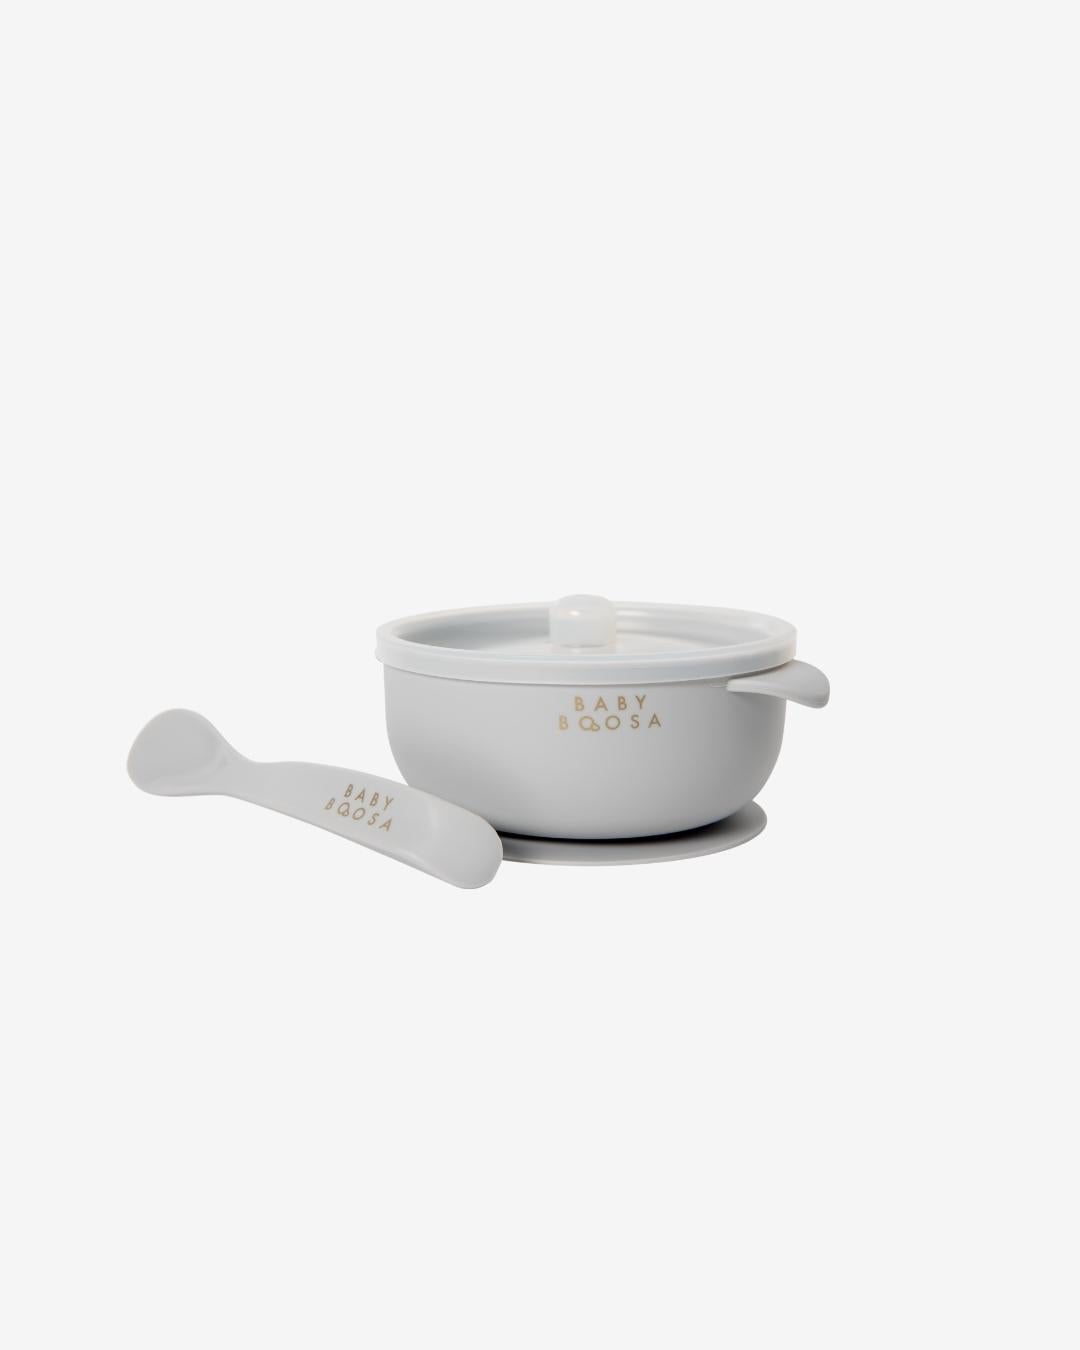 Bowl + Lid + Spoon Set | Grippy Suction | No-Spill | Easy Clean | Teething Soft Spoon (Concrete Grey)